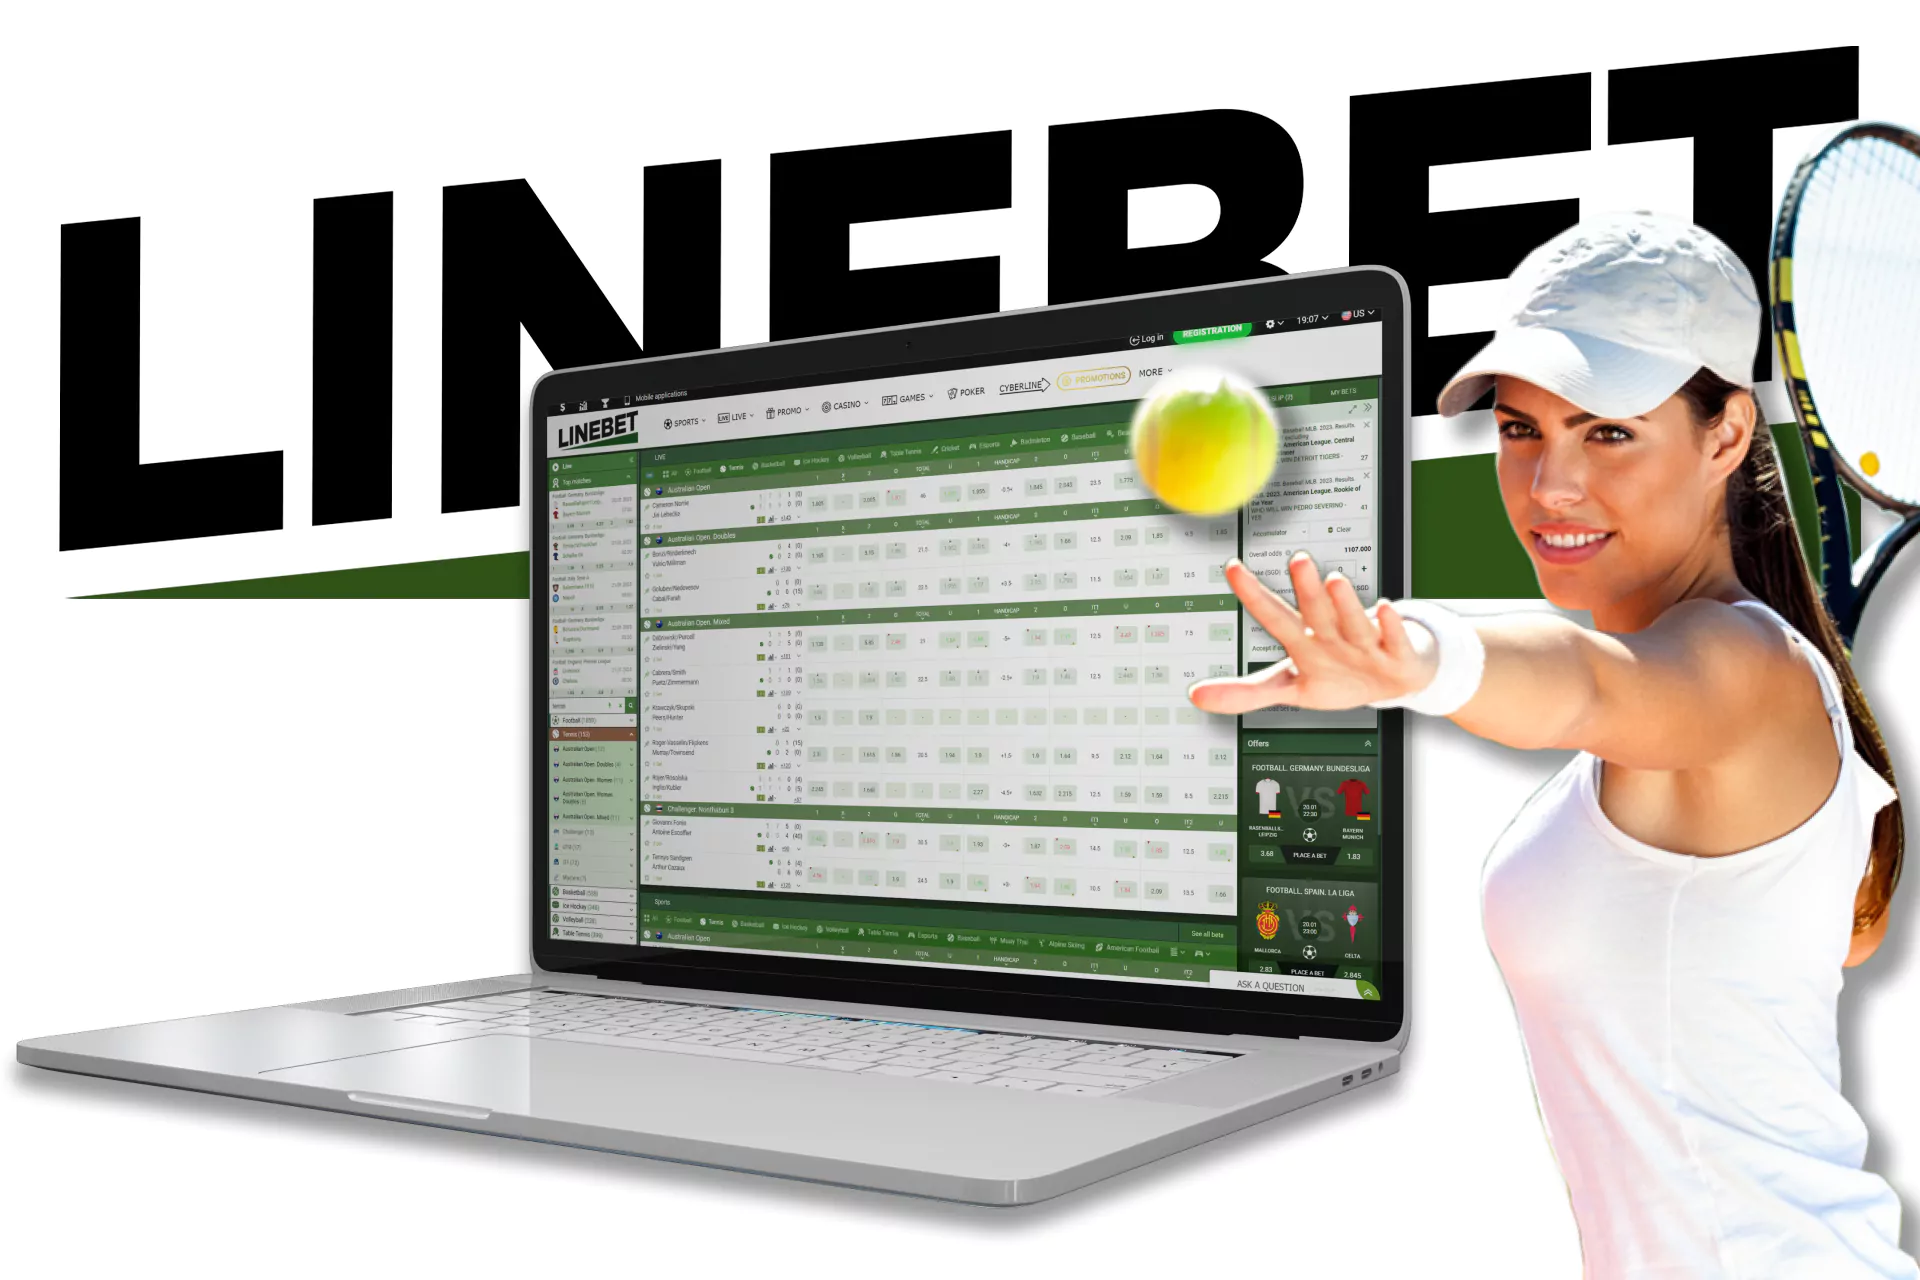 With Linebet you can bet on any tournament and tennis matches.